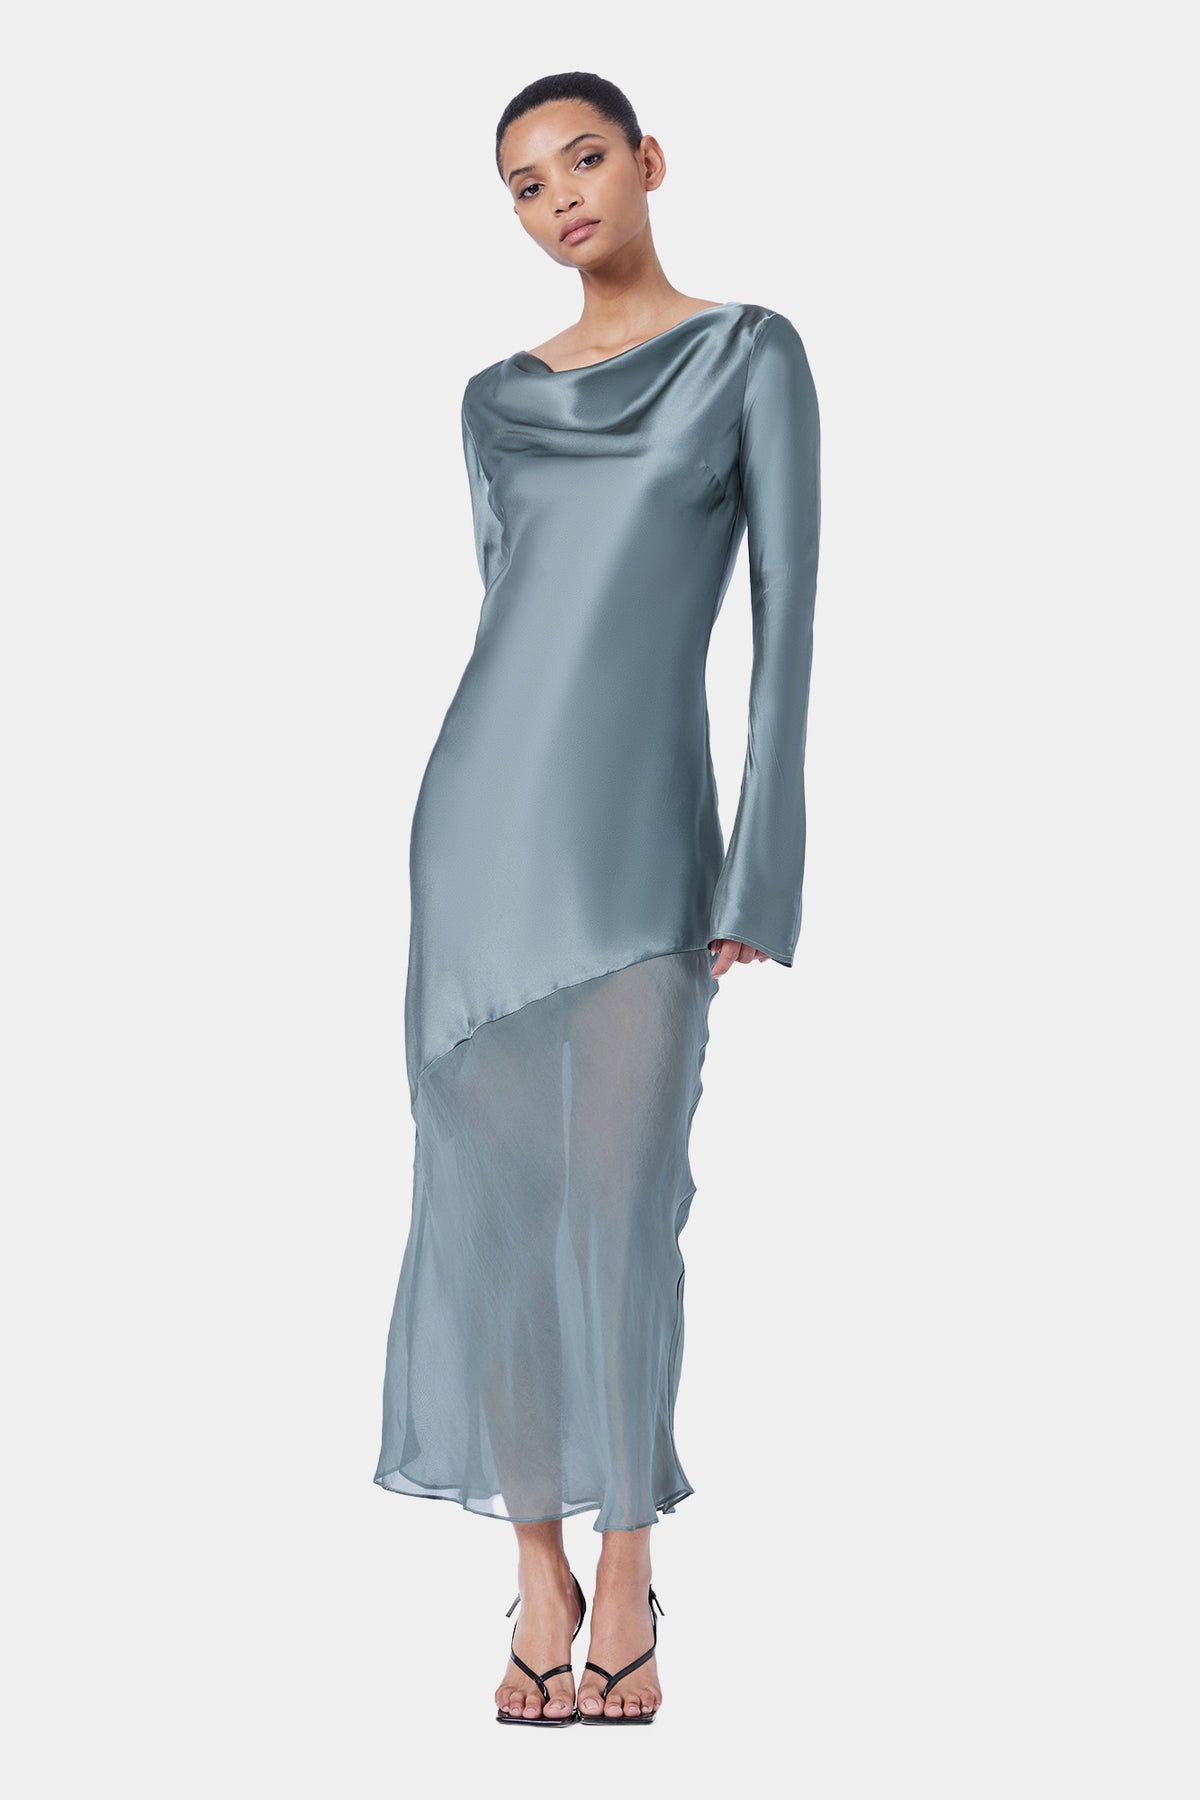 The Asym Splice LS Dress By GINIA In Moss